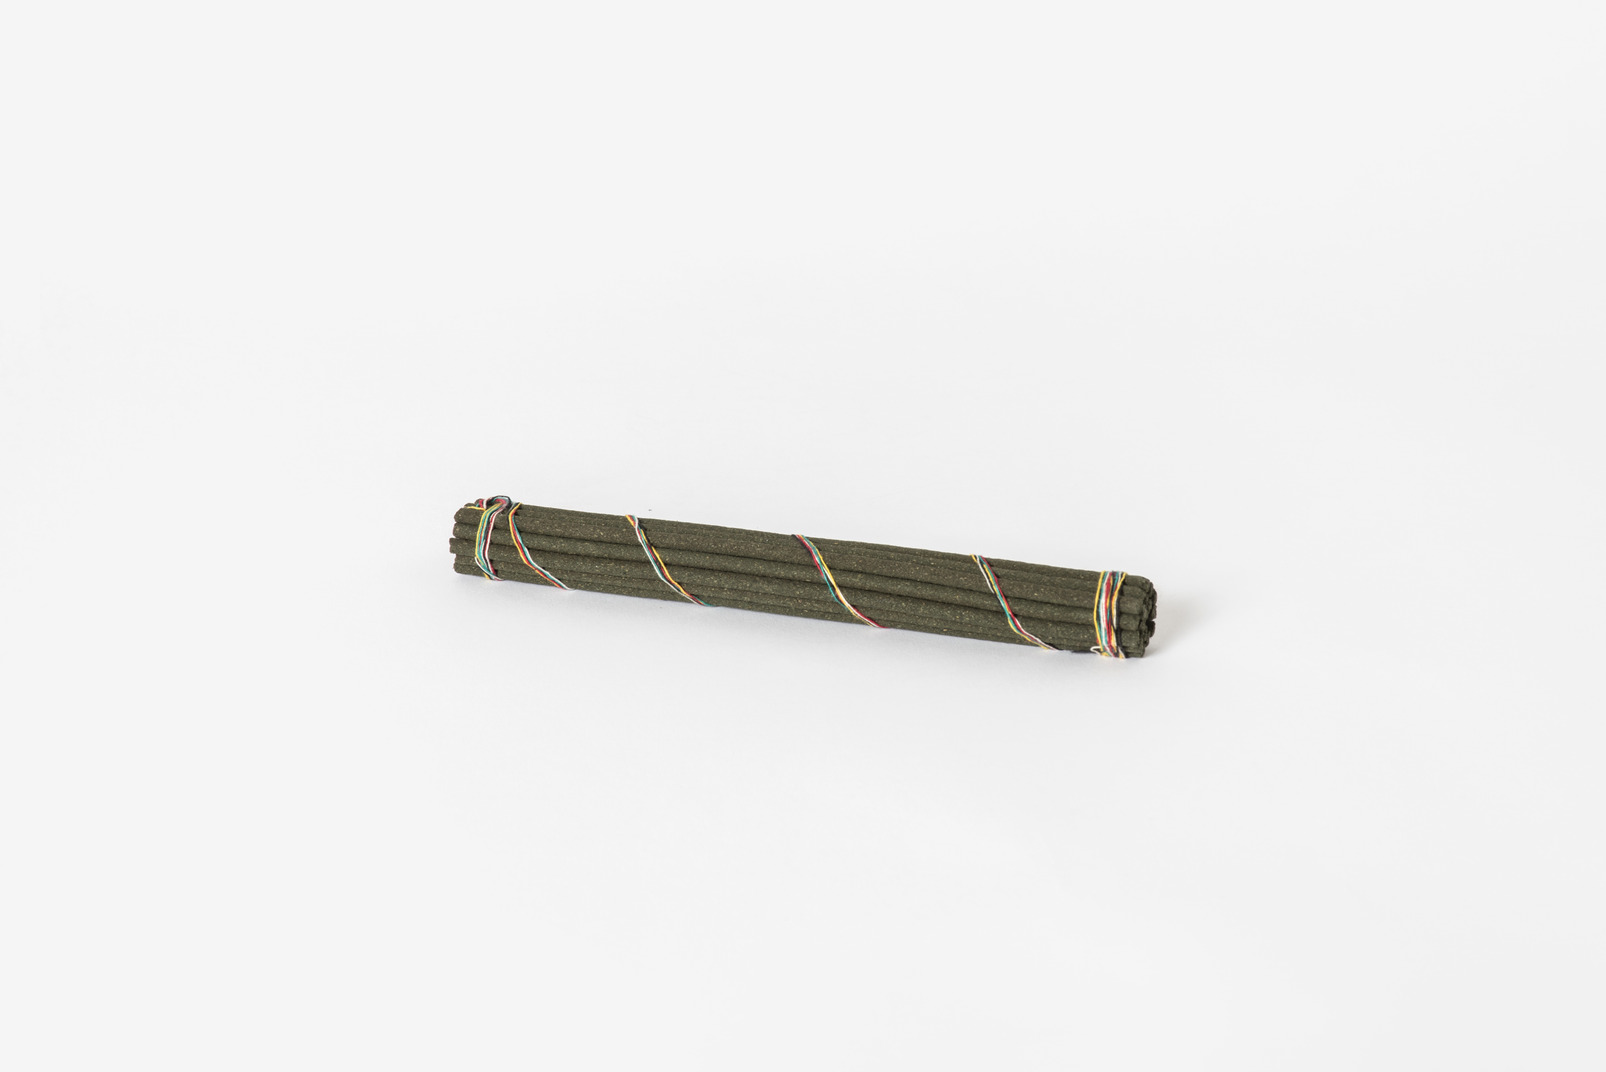 Pack of incense sticks on white background